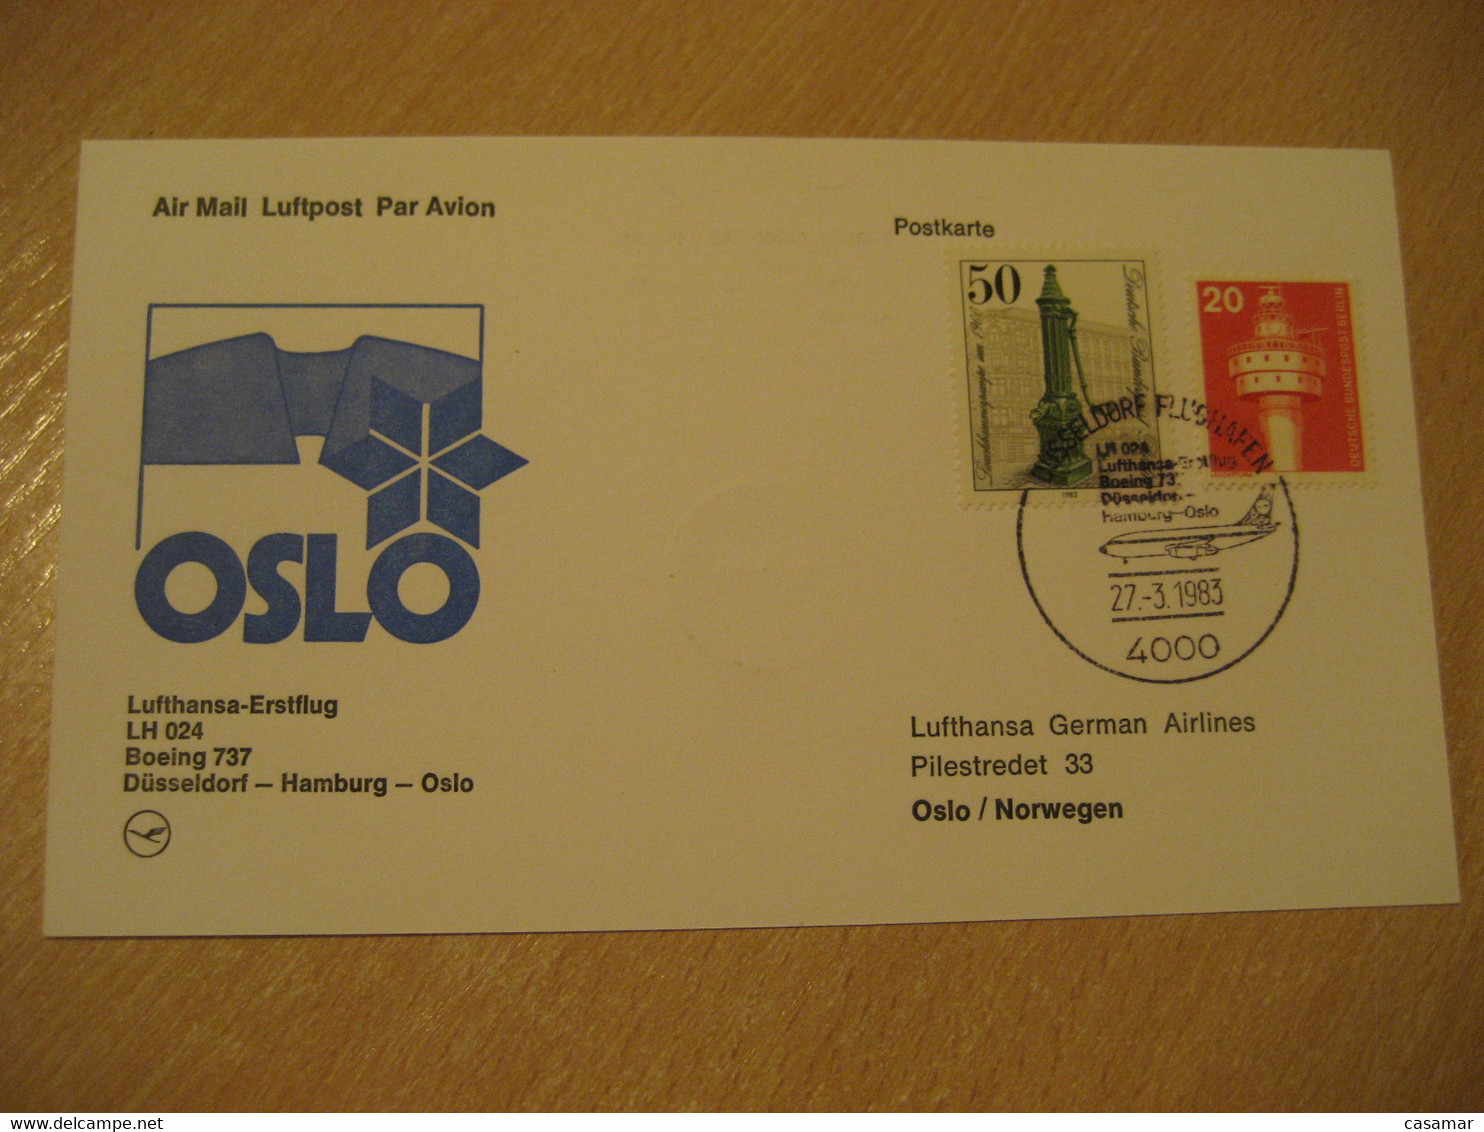 OSLO Dusseldorf Hamburg 1983 Lufthansa Airlines Airline Boeing 737 First Flight Black Cancel Card NORWAY GERMANY - Covers & Documents